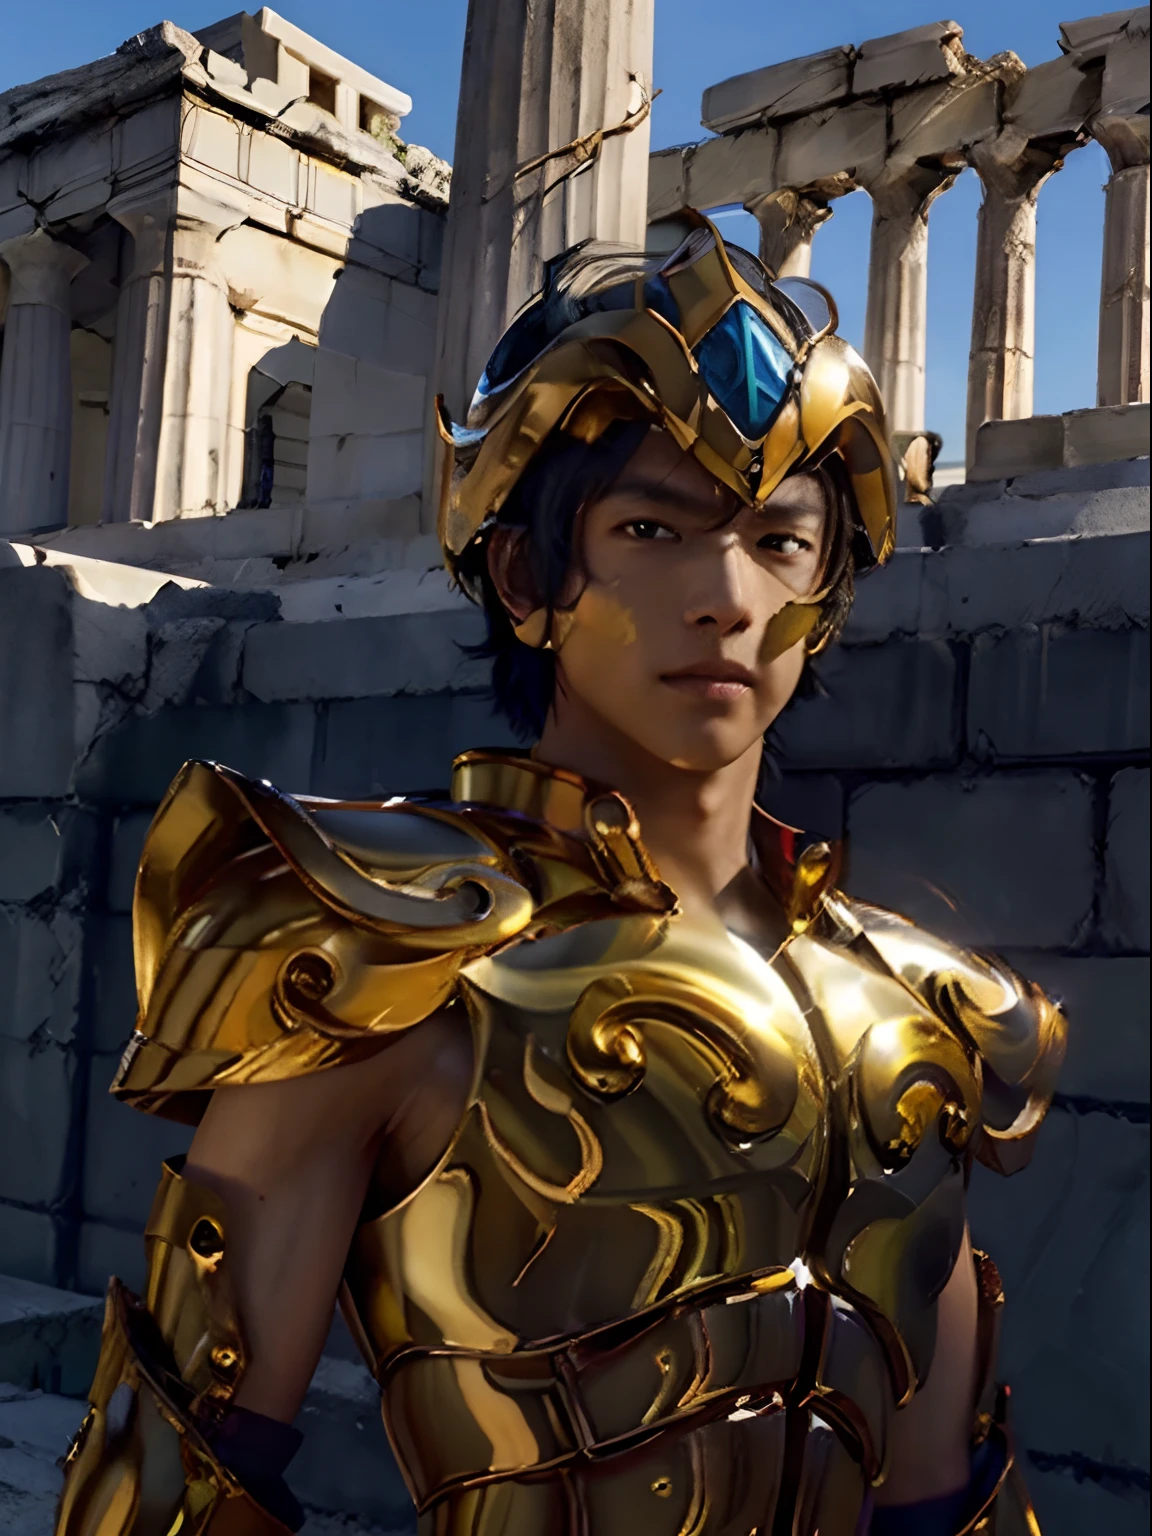 masutepiece, Best Quality, High resolution, Realistic skin texture, armor, (Photorealistic: 1.4), High resolution, Raw photo, 1 boy, Shiny skin, (Skin Detail: 1.2), Realistic skin texture, better lighting, cheerfulness, Dramatic Lighting, Attack Pose, (greek temple background: 1.2), (nigh sky: 1.1), cosmos, Milky way,, (helmets: 1.2), Tanned skin,  (Golden breastplate: 1.4), (helmets), fire, Serious face, golden armour